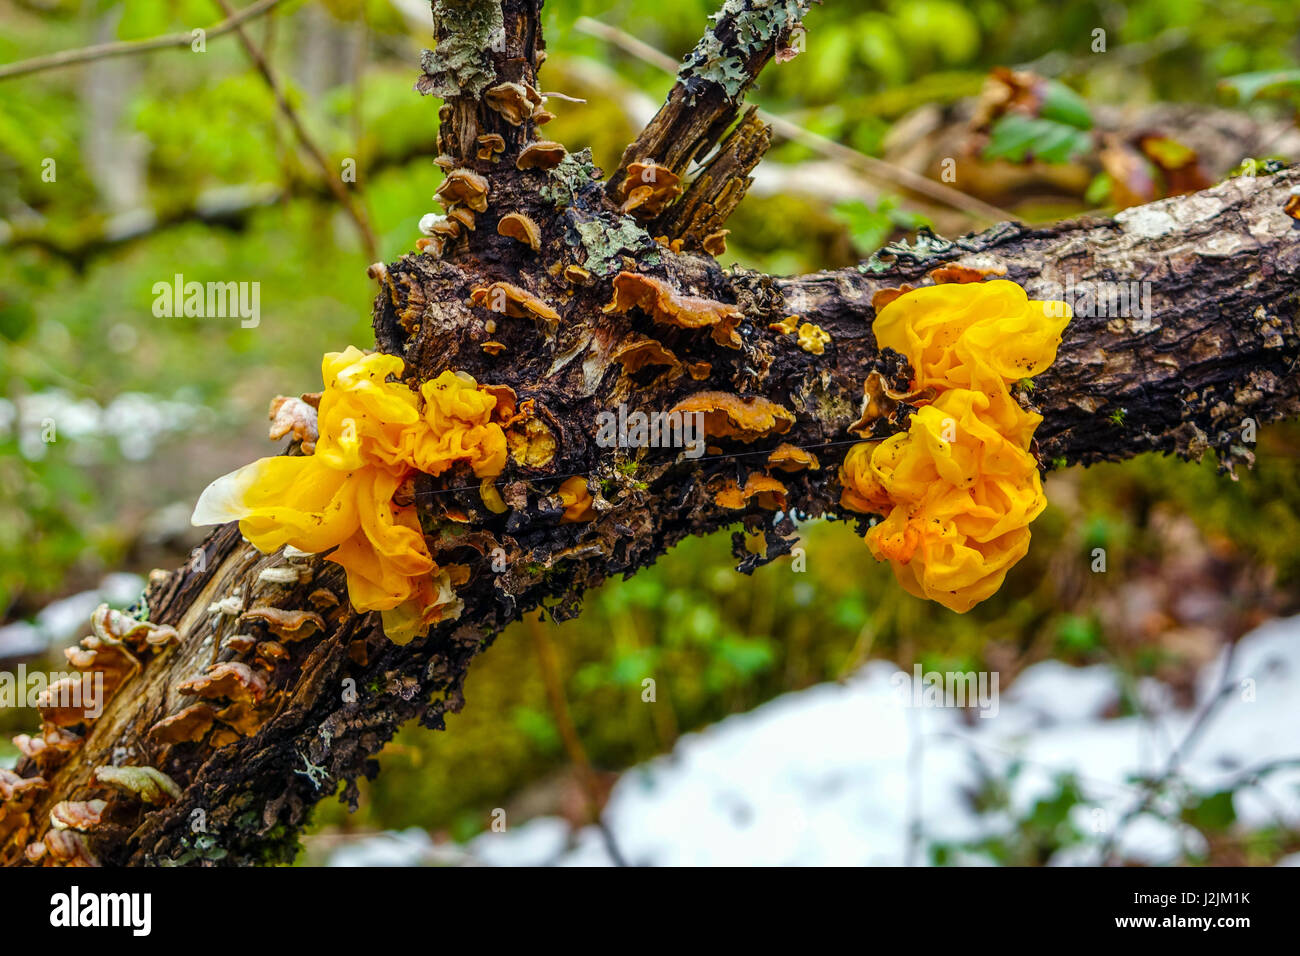 Yellow Brain Fungus growing on tree branch, French Pyrenees Stock Photo